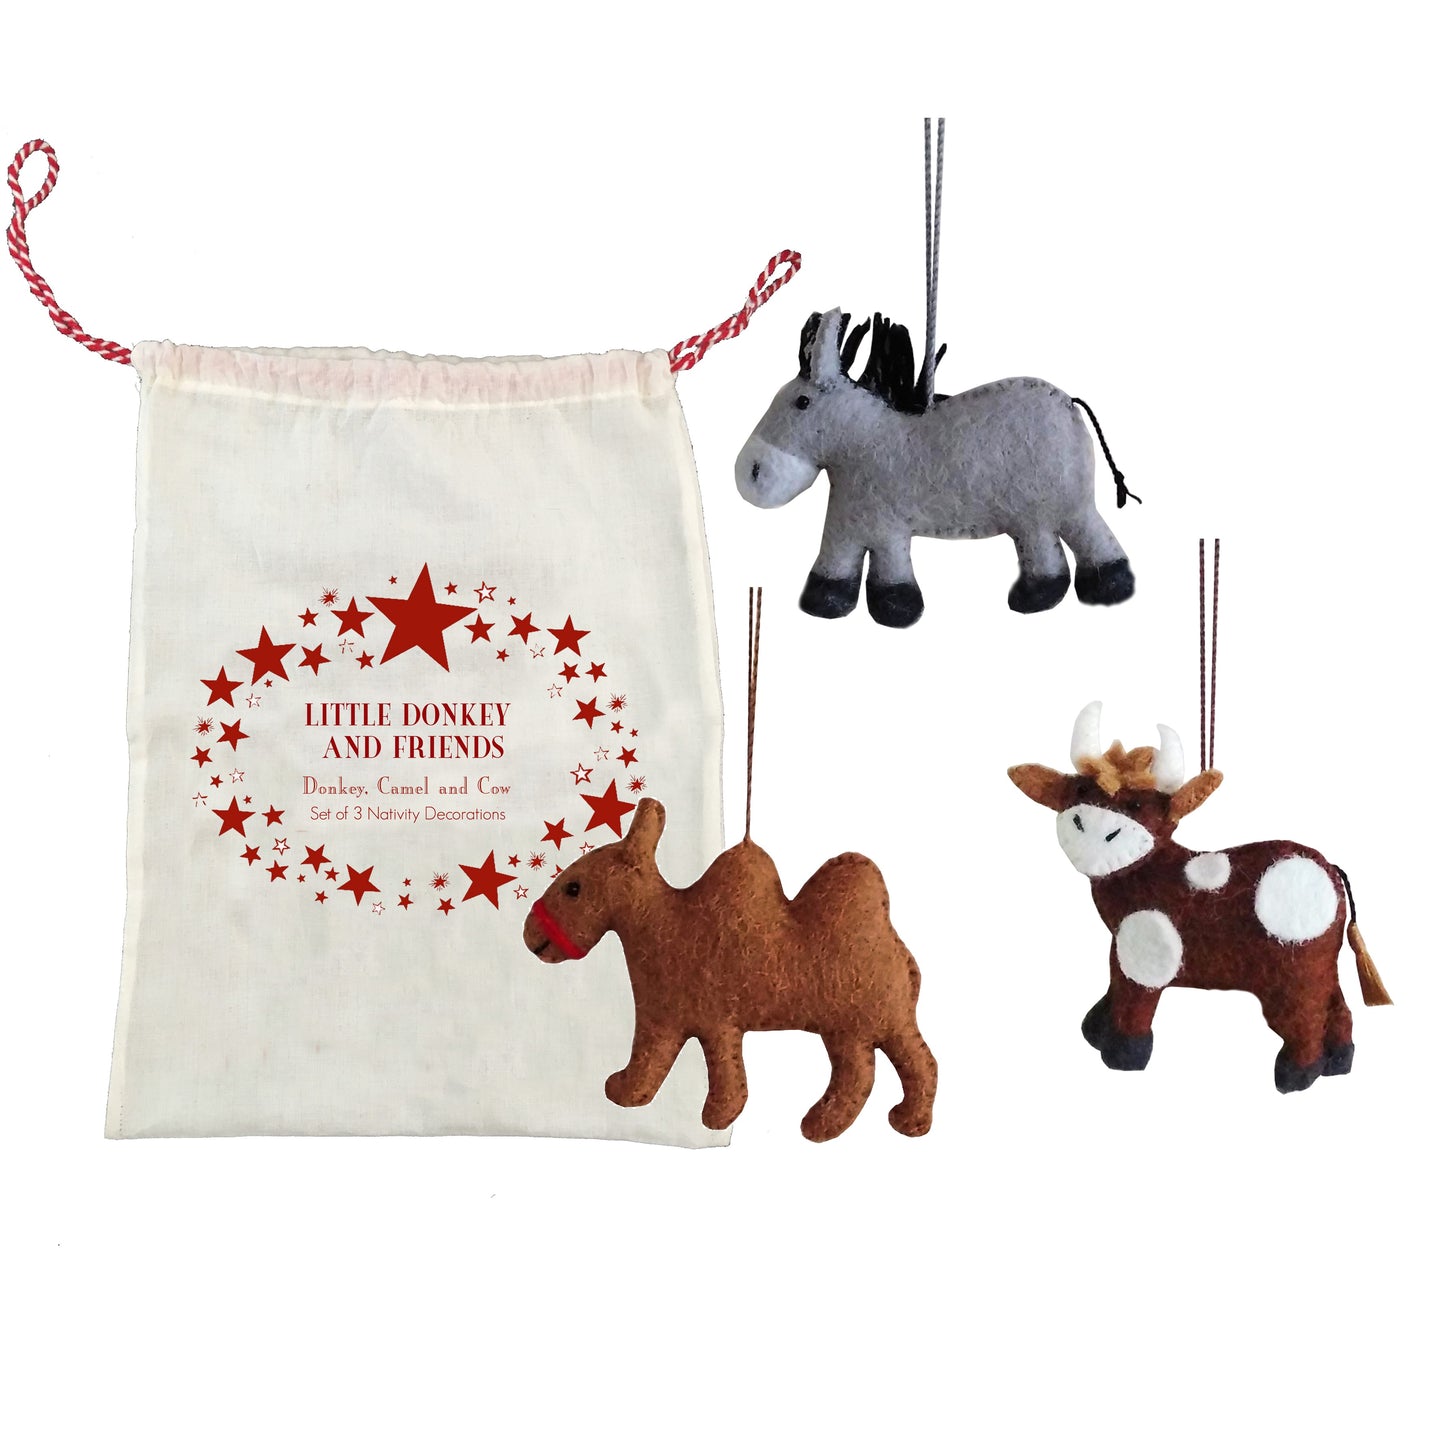 Nativity  Decoration Set - Donkey, Camel and Cow - Set of 3 in Bag